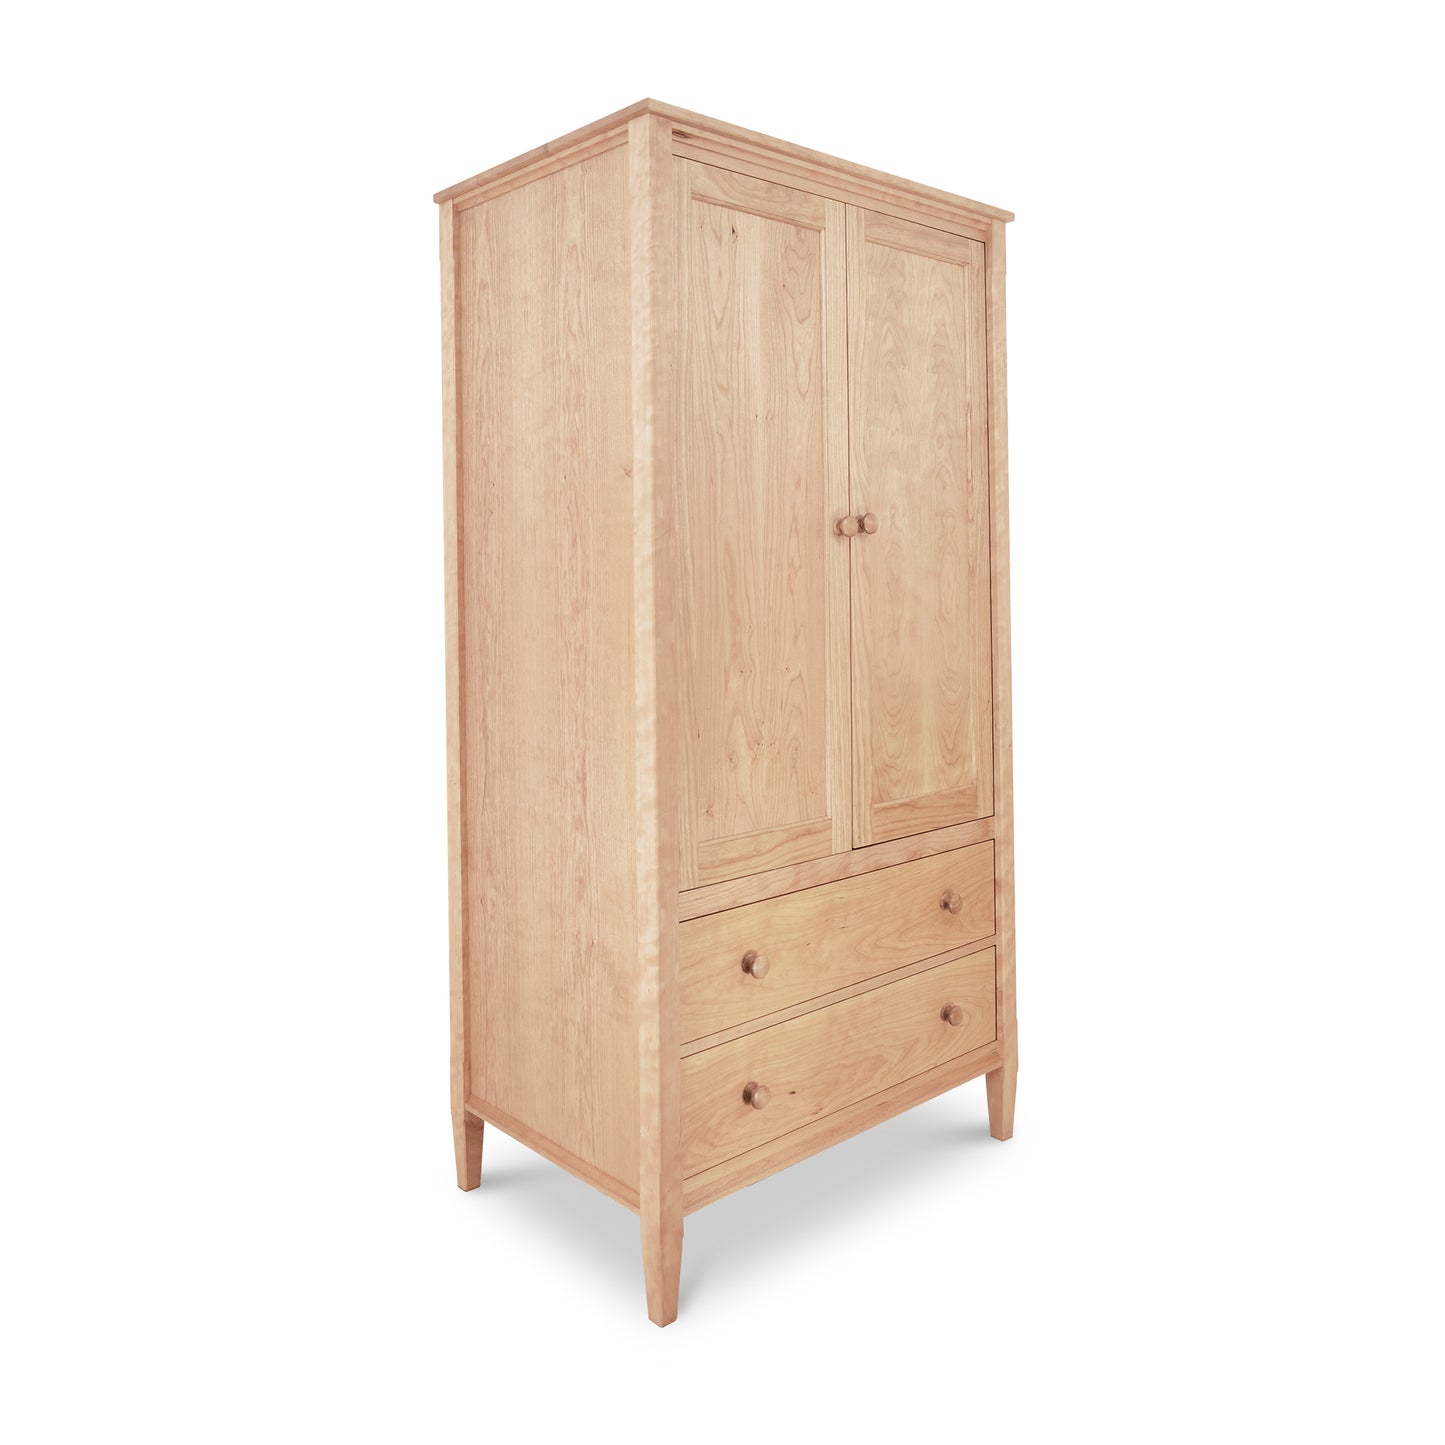 Maple Corner Woodworks Vermont Shaker Armoire: Solid wood wardrobe with two doors and a lower drawer, isolated on a white background, embodying heirloom quality.